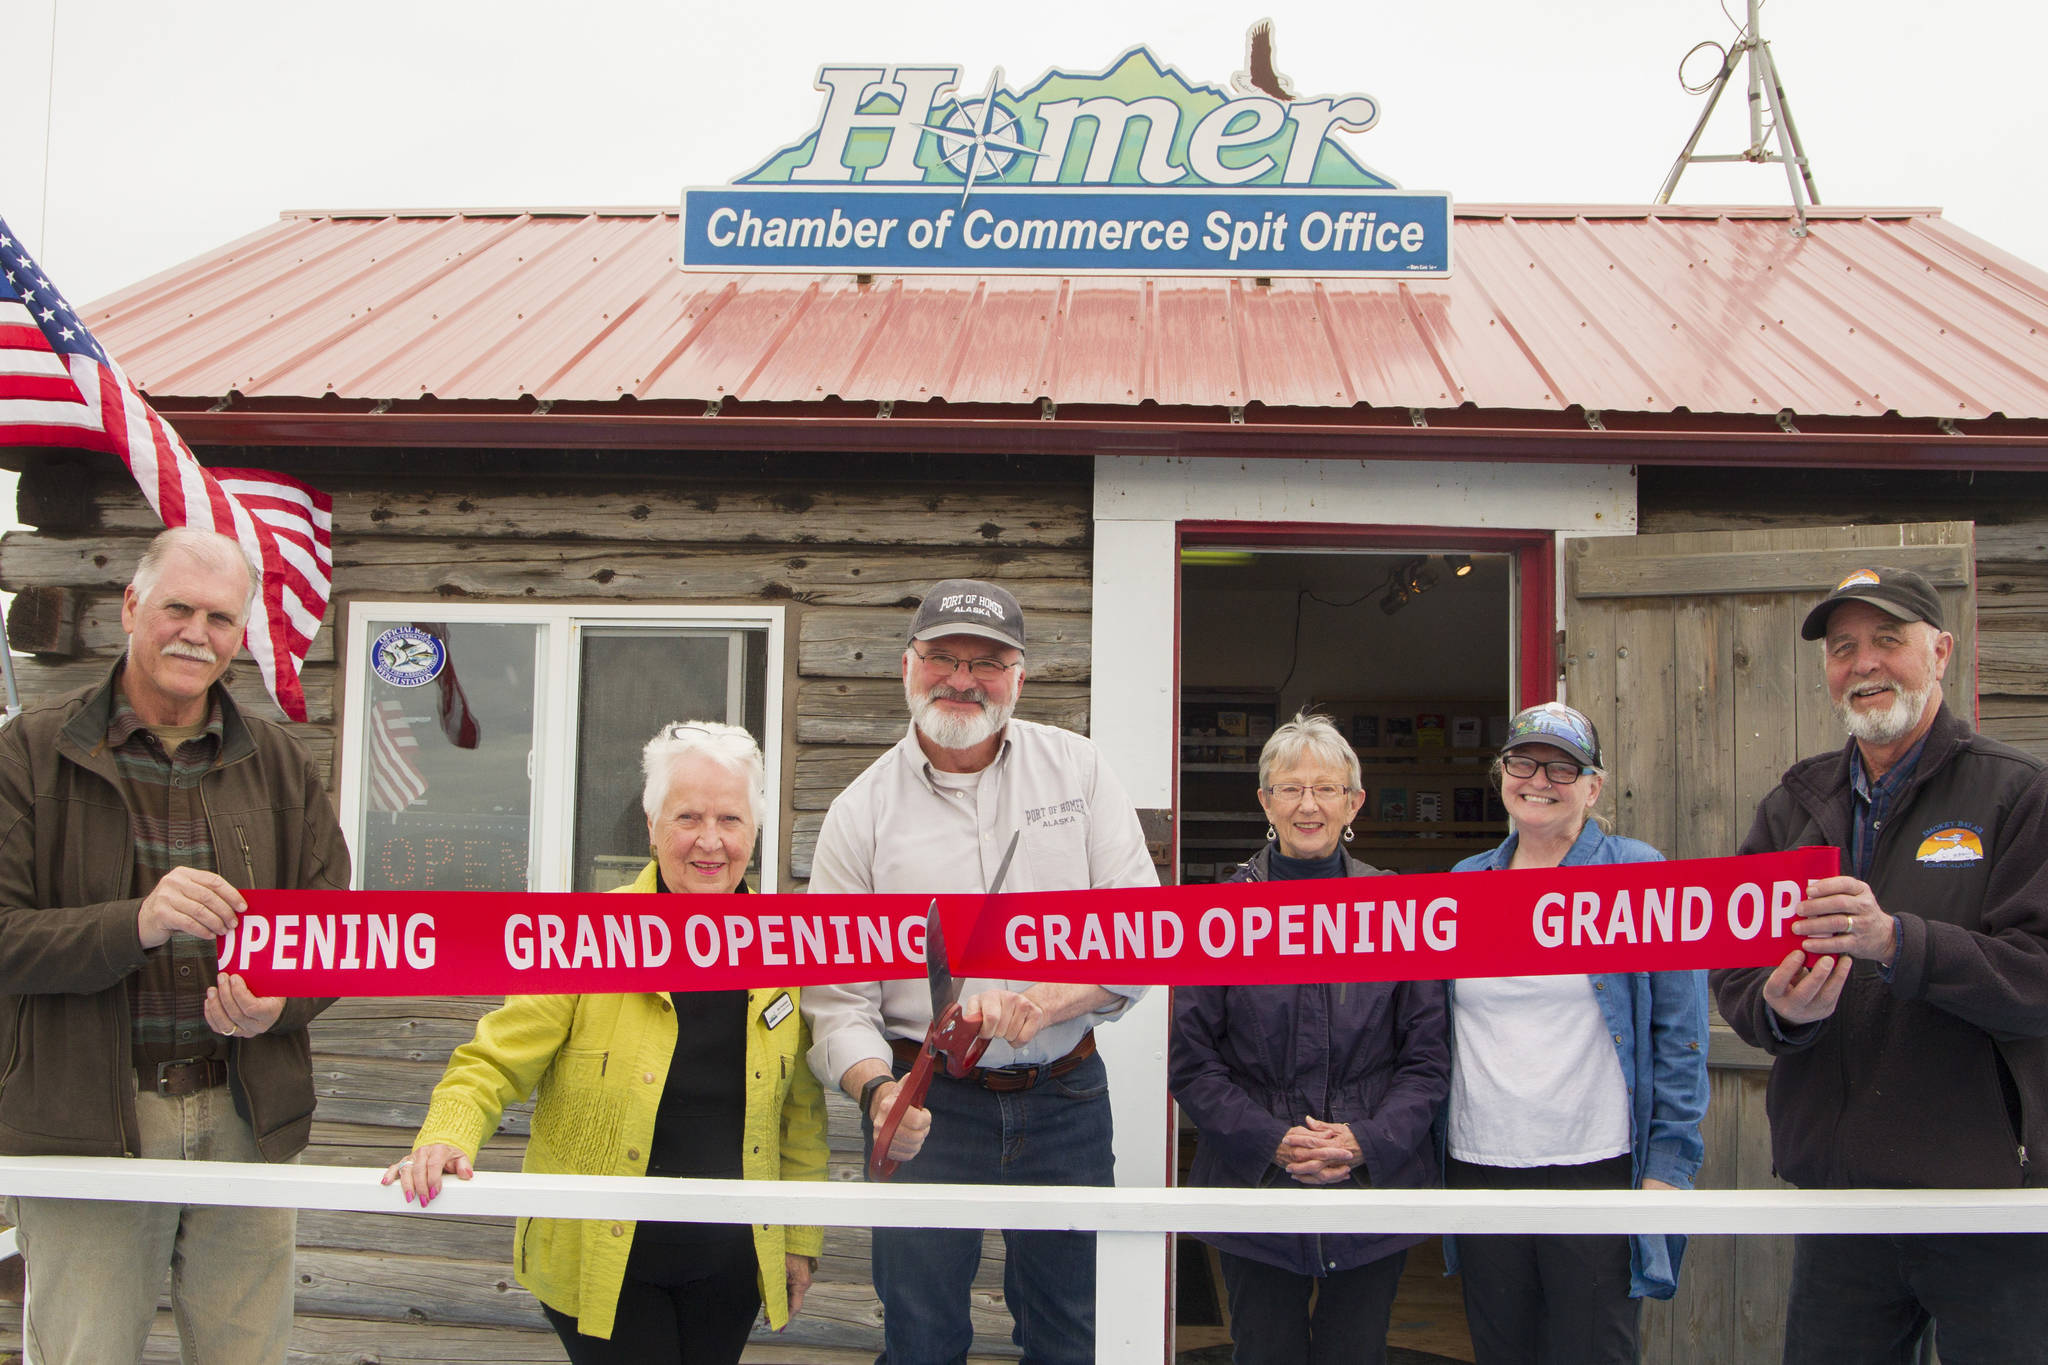 The Homer Chamber of Commerce and Visitor Center hosted a grand opening and ribbon-cutting ceremony for the new Homer Spit Visitor Information Center July 1. The office, located near Ramp 4 on the Homer Spit, will be open Thursdays through Sundays, July 1-Sept. 5 to offer information about Homer to visitors. (Photo by Sarah Knapp/Homer News)